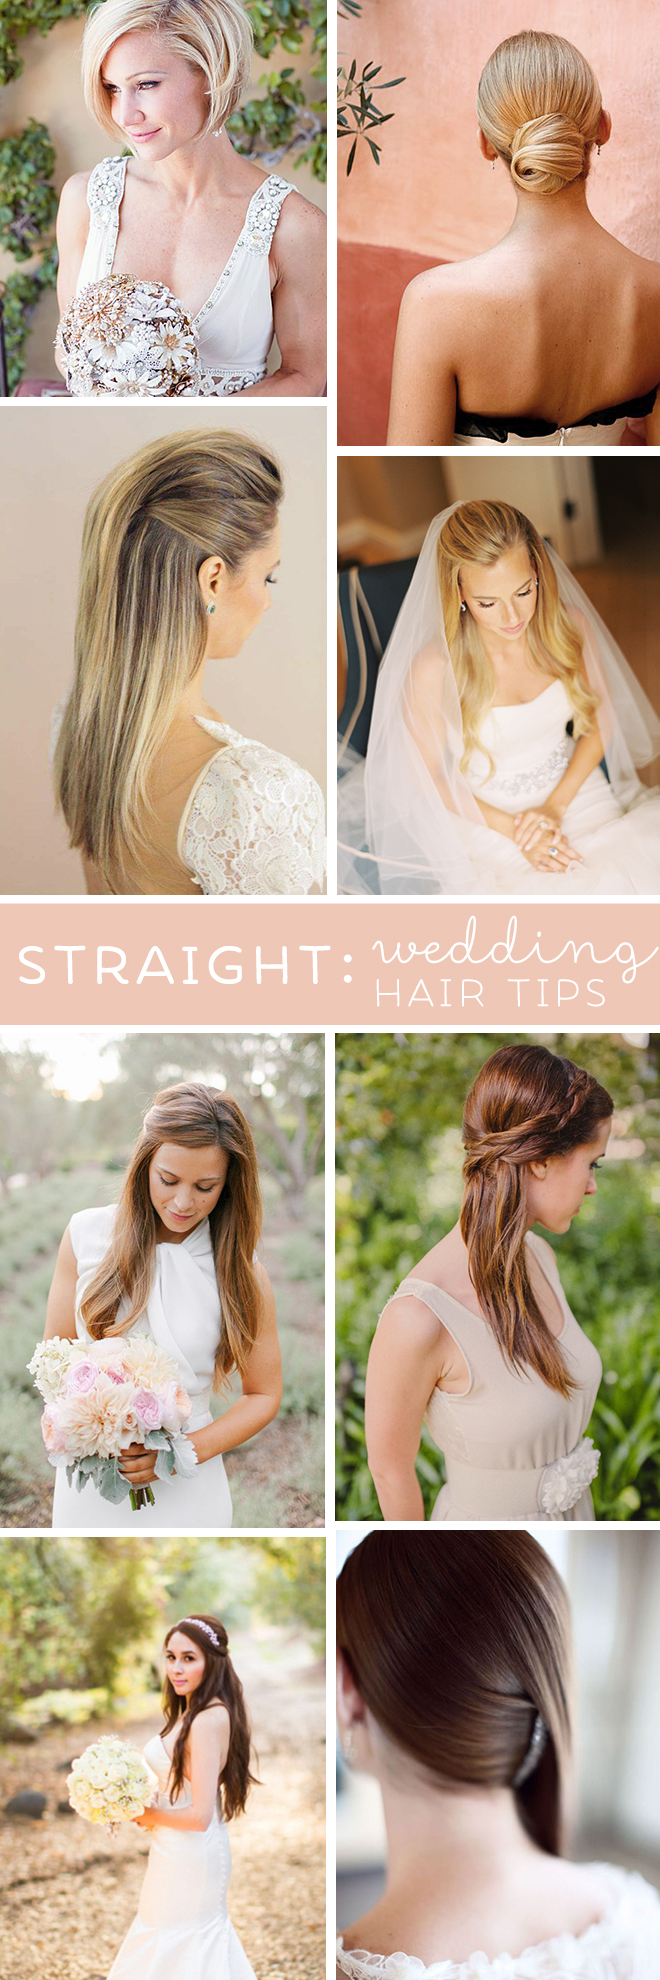 Must Read Tips for wearing straight hairstyles on your wedding day!